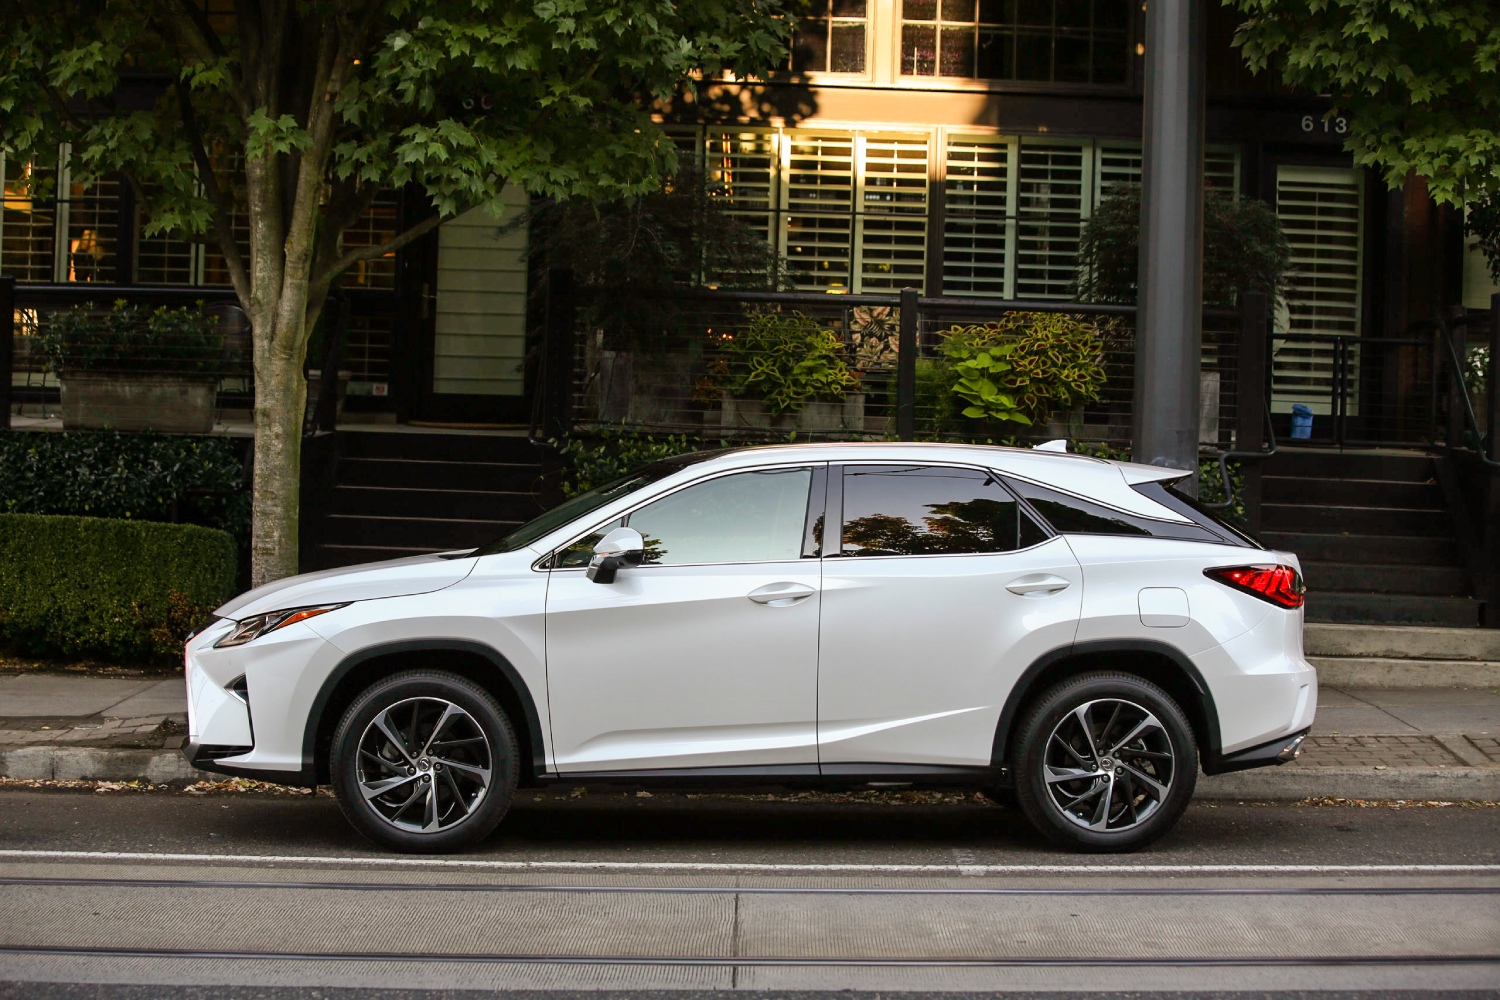 These popular and dependable SUVs include this white Lexus RX